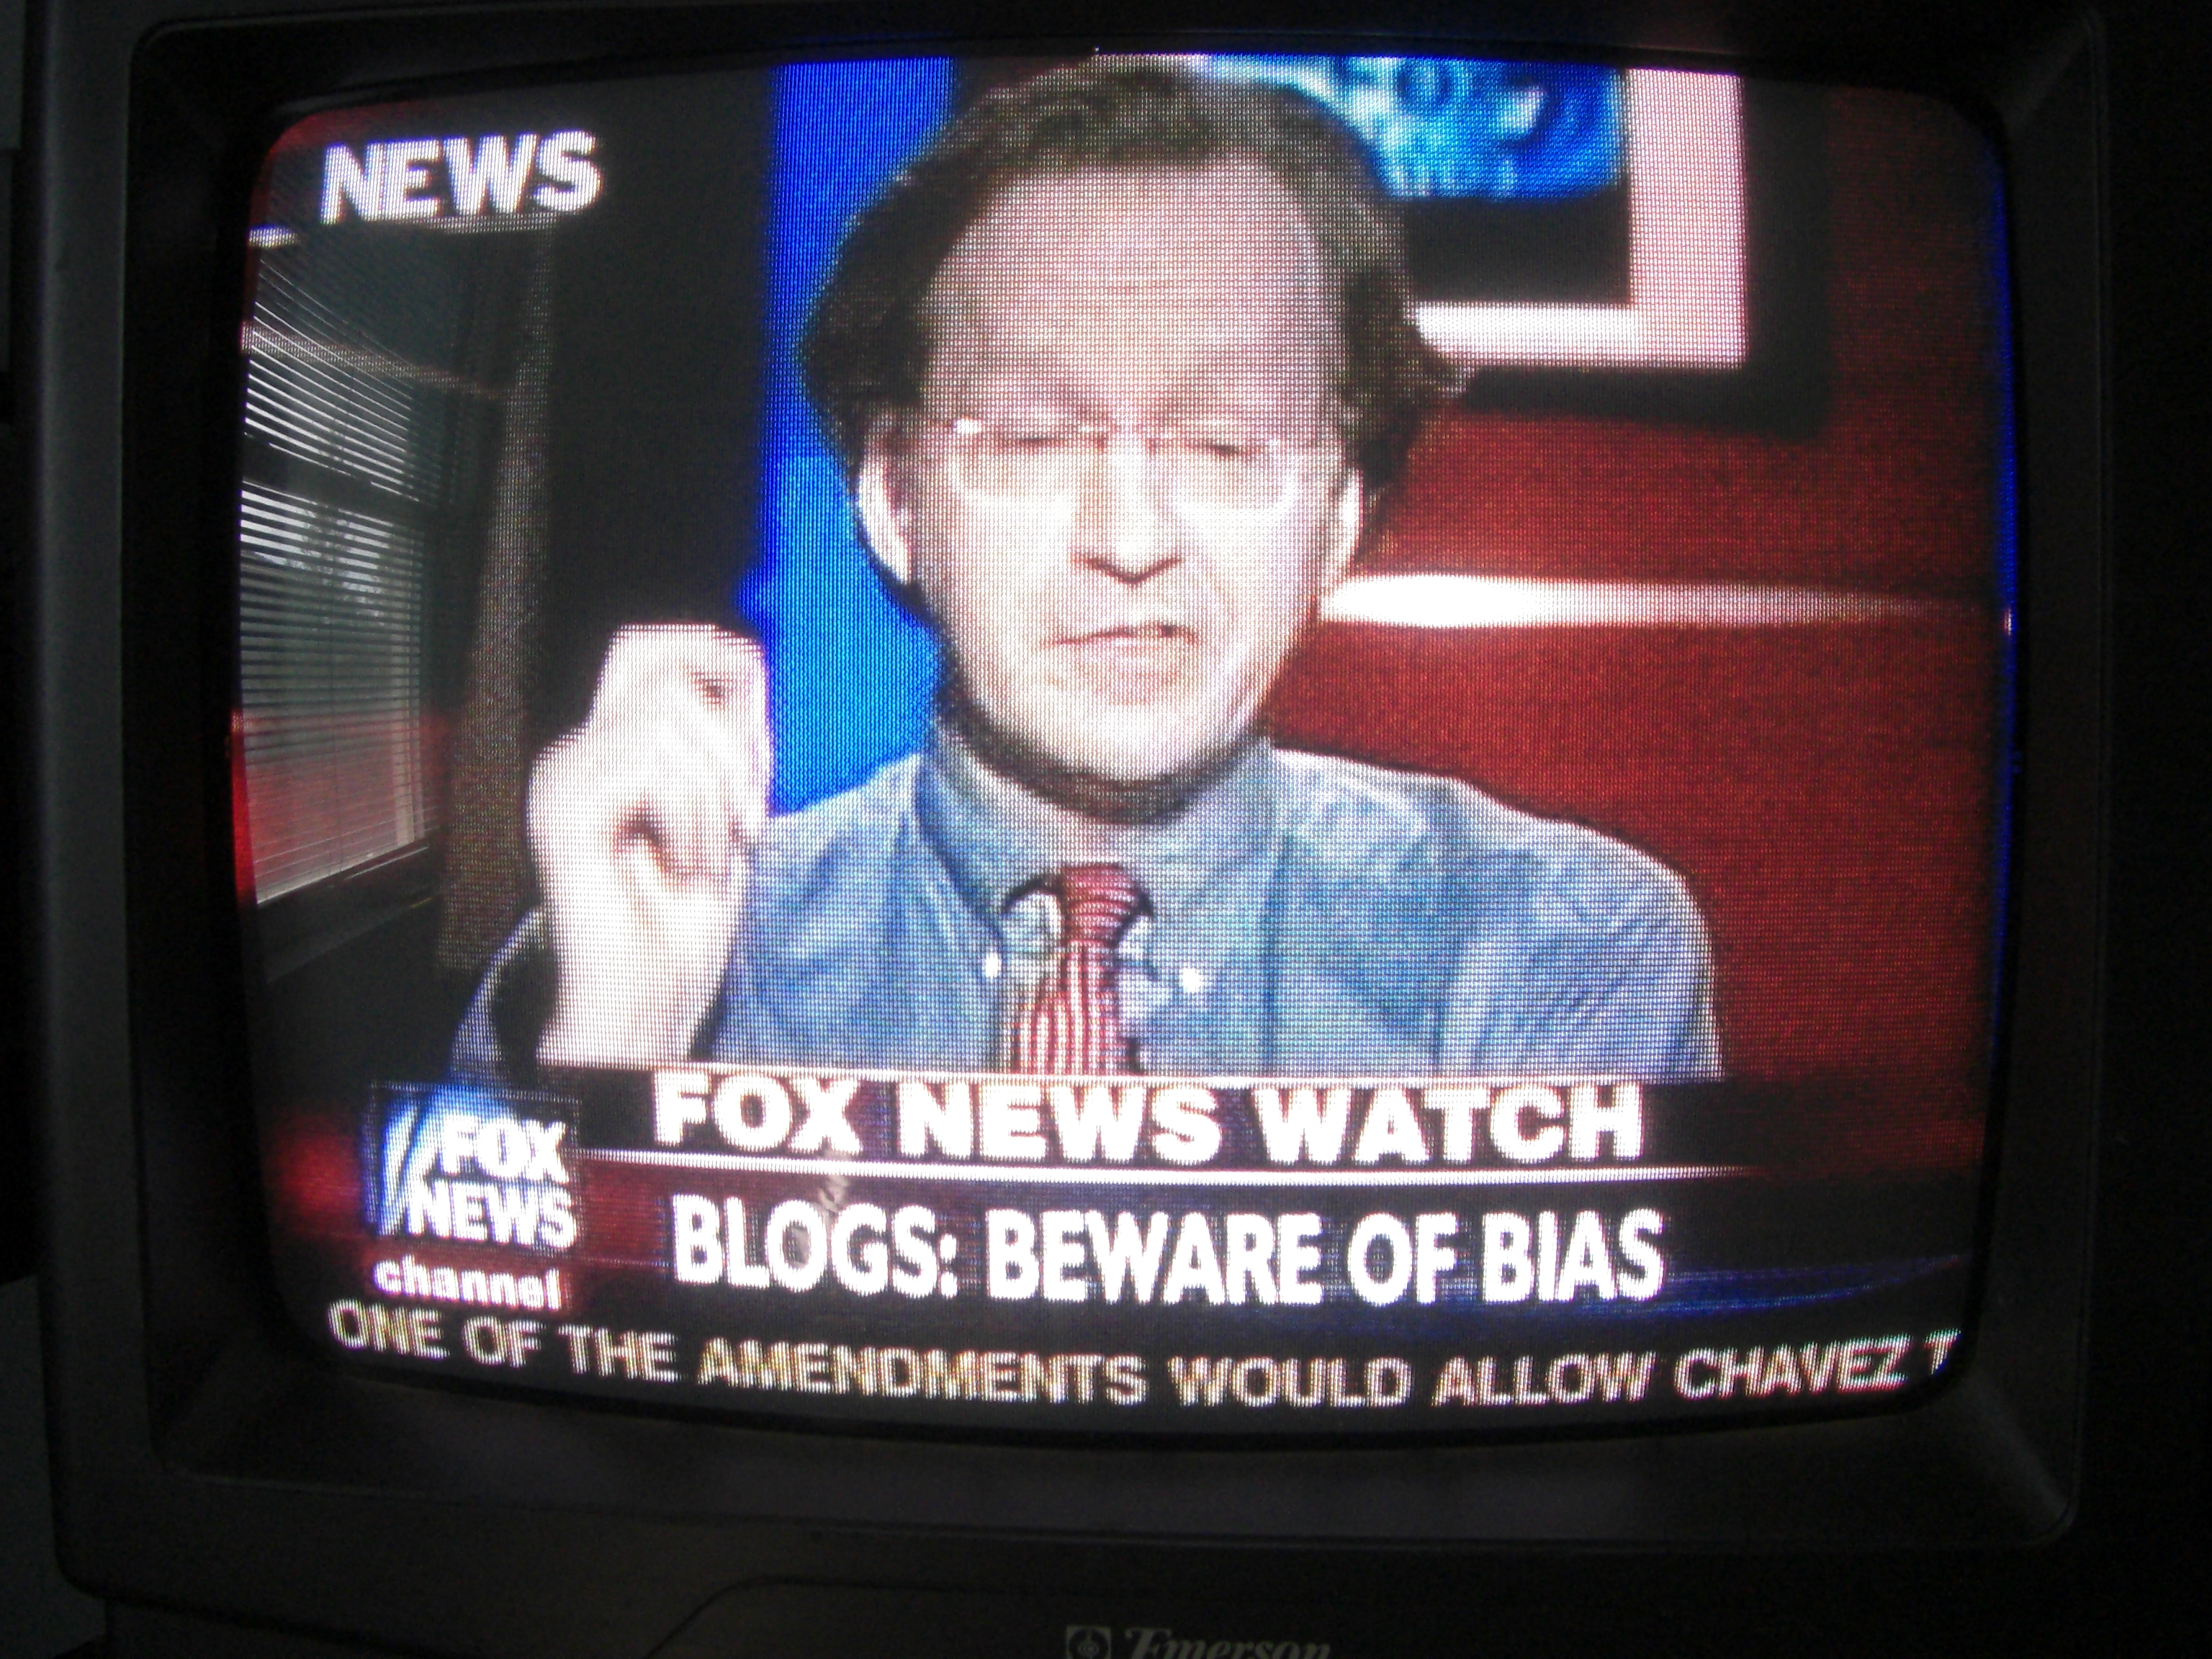 Fox says Blogs are Biased. Of all the...